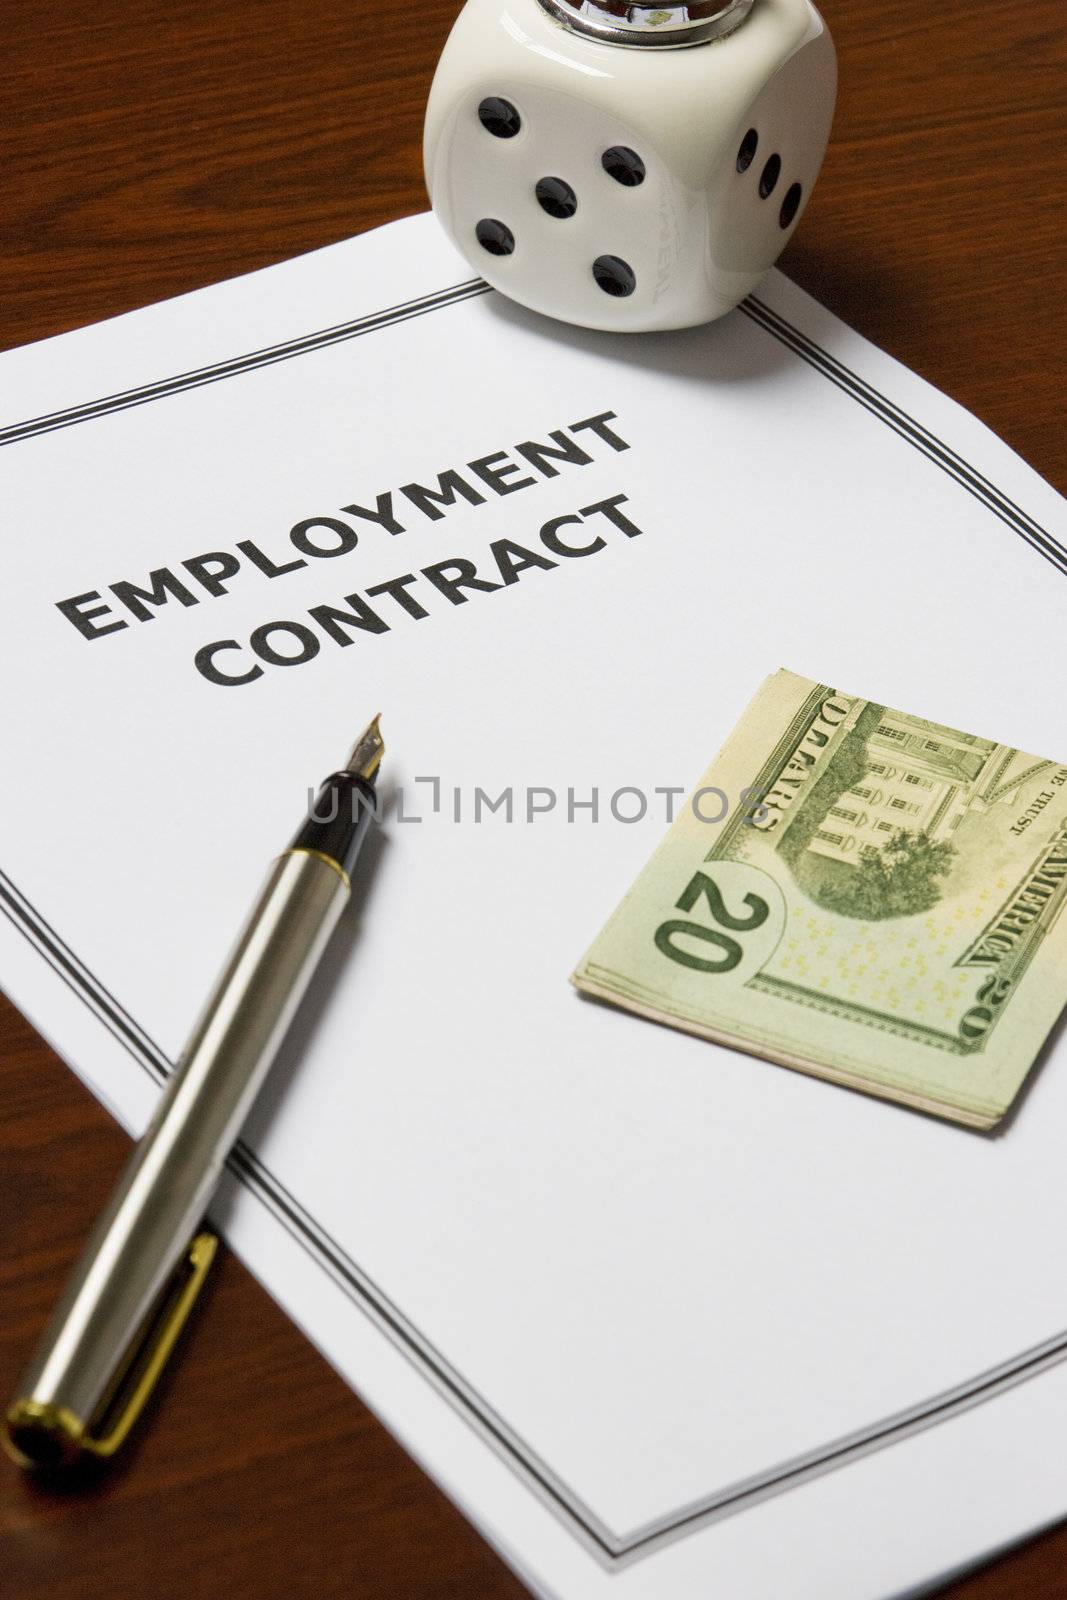 Image of an employment contract on an office table.